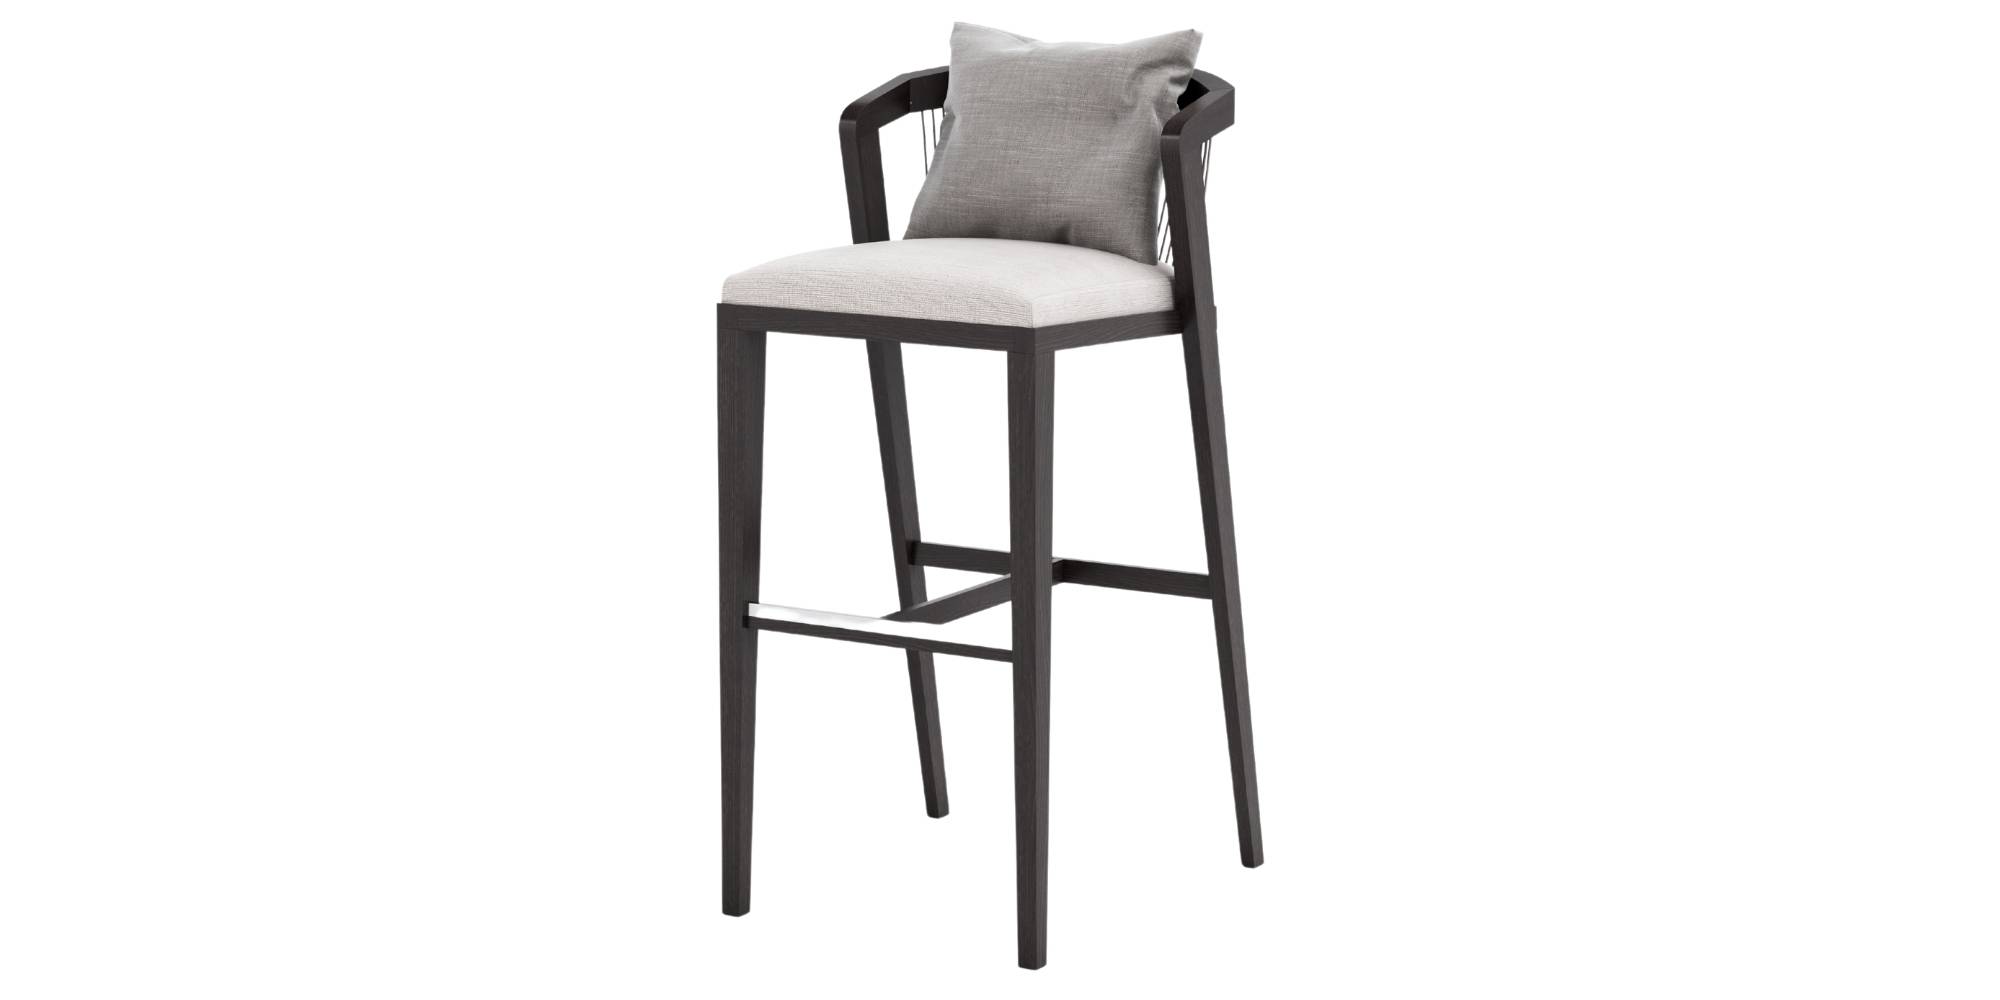 Largo Bar Stool in Outdoor Bar Stools for Largo collection